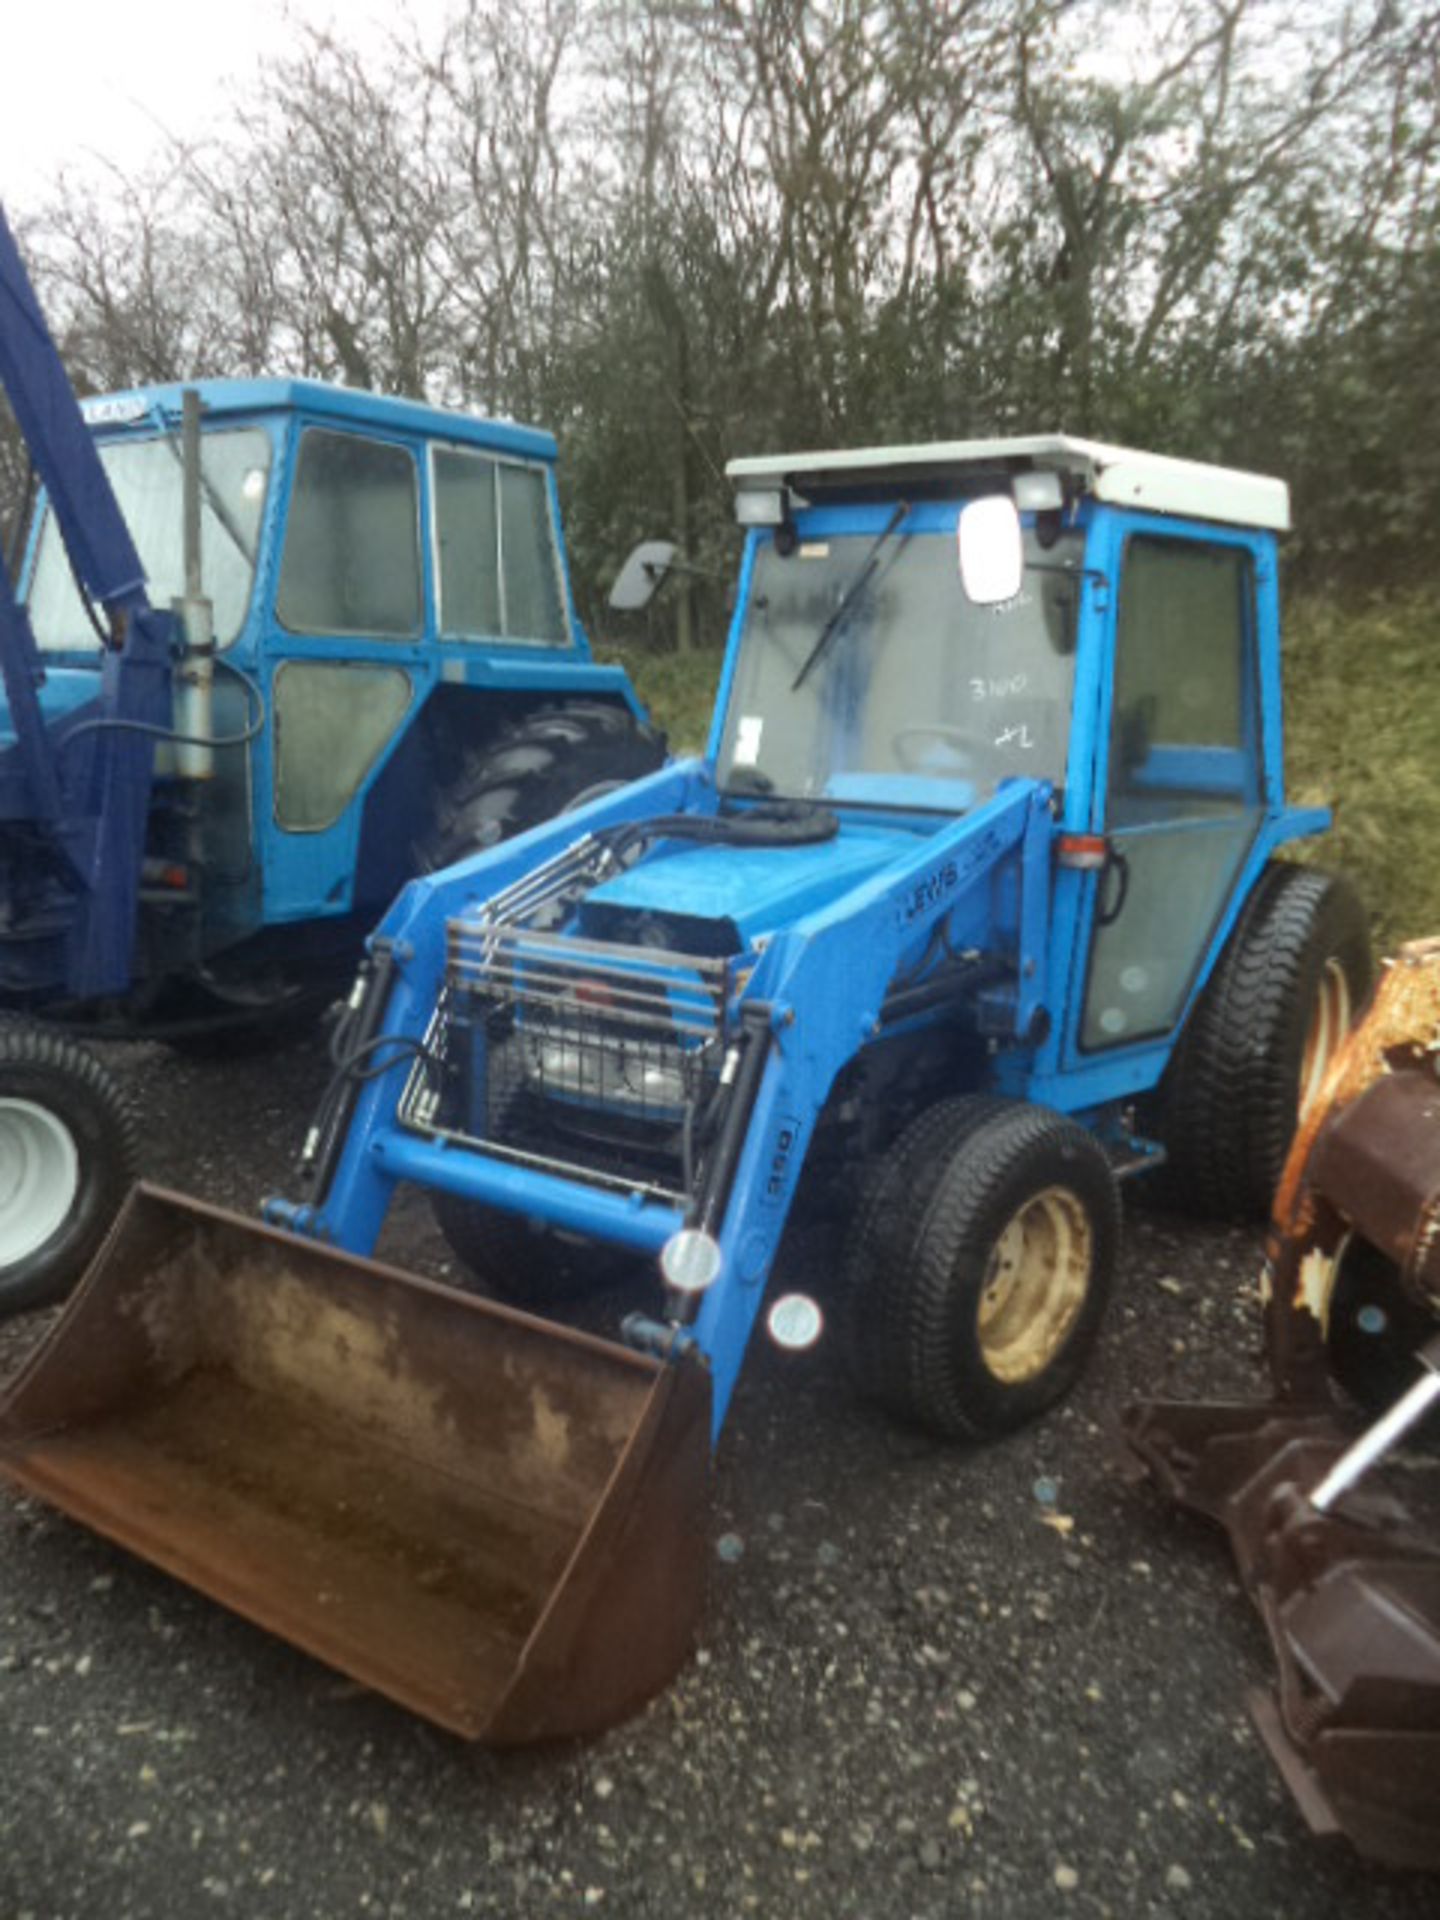 ISEKI TK538 4wd compact tractor c/w full cab & front loader & bucket, 3220 recorded hrs (R&D)